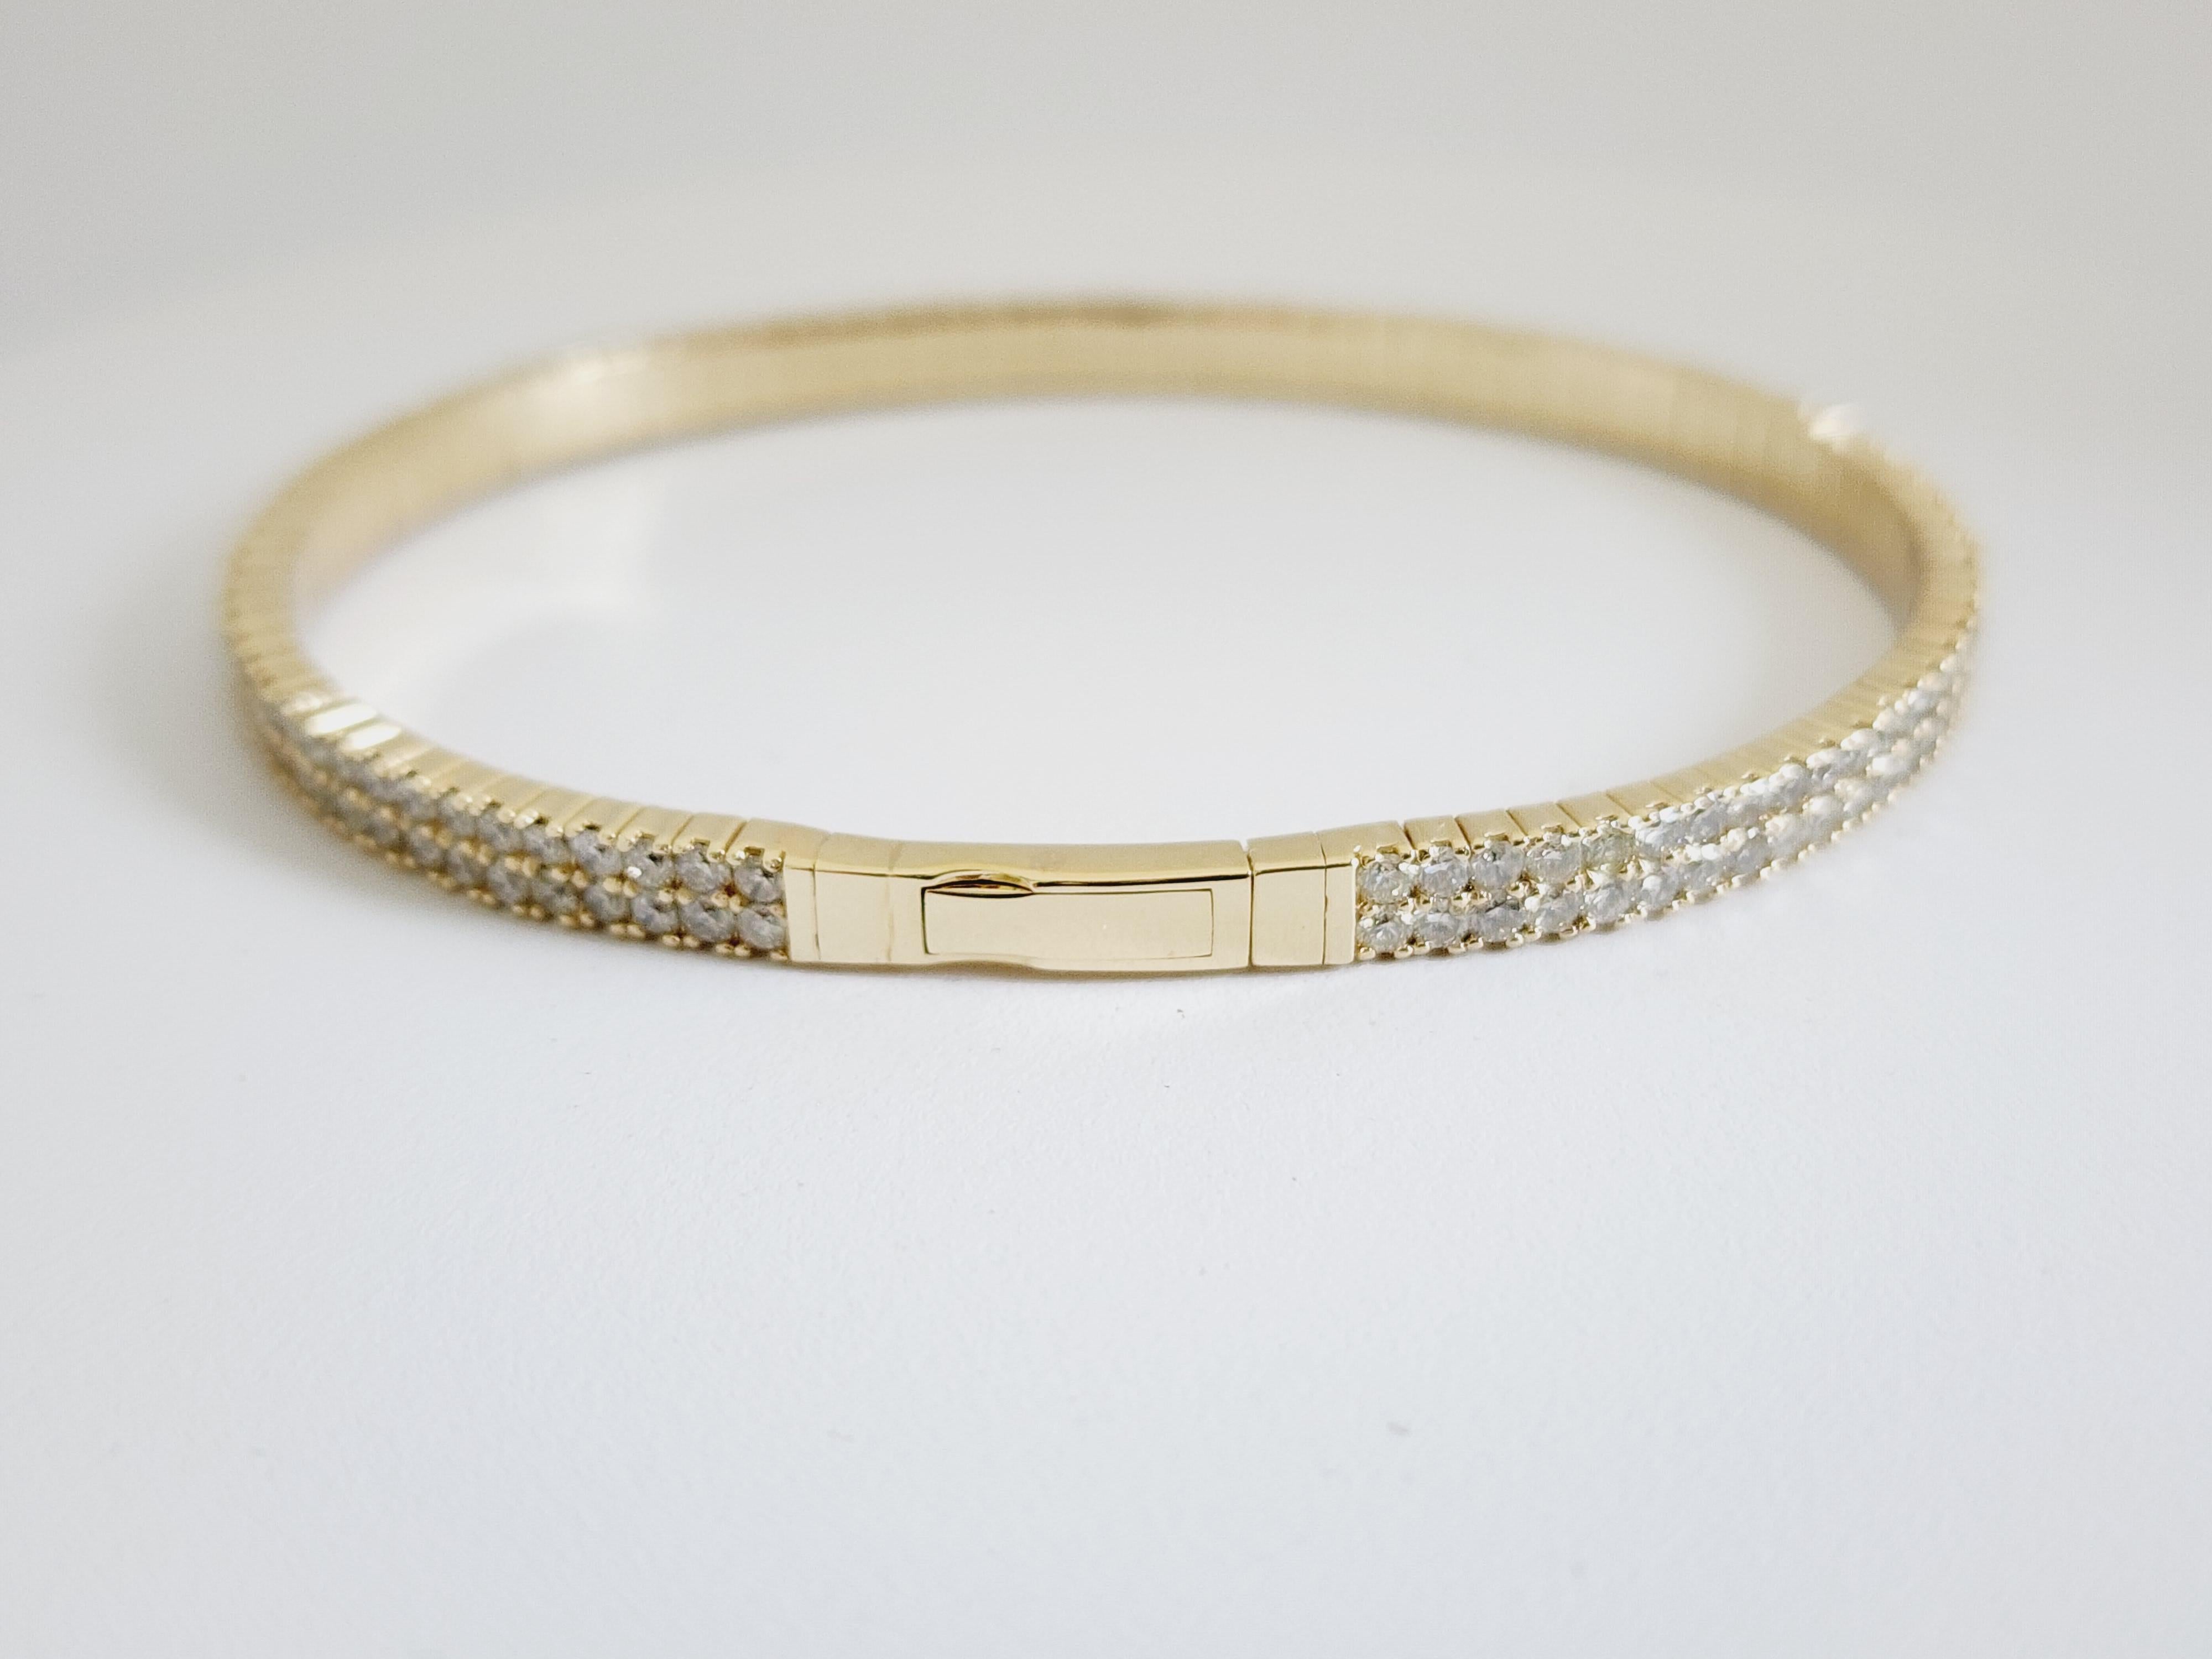 4.80 Carat Double Row Flexible Bangle Yellow Gold 14 Karat Bracelet In New Condition For Sale In Great Neck, NY